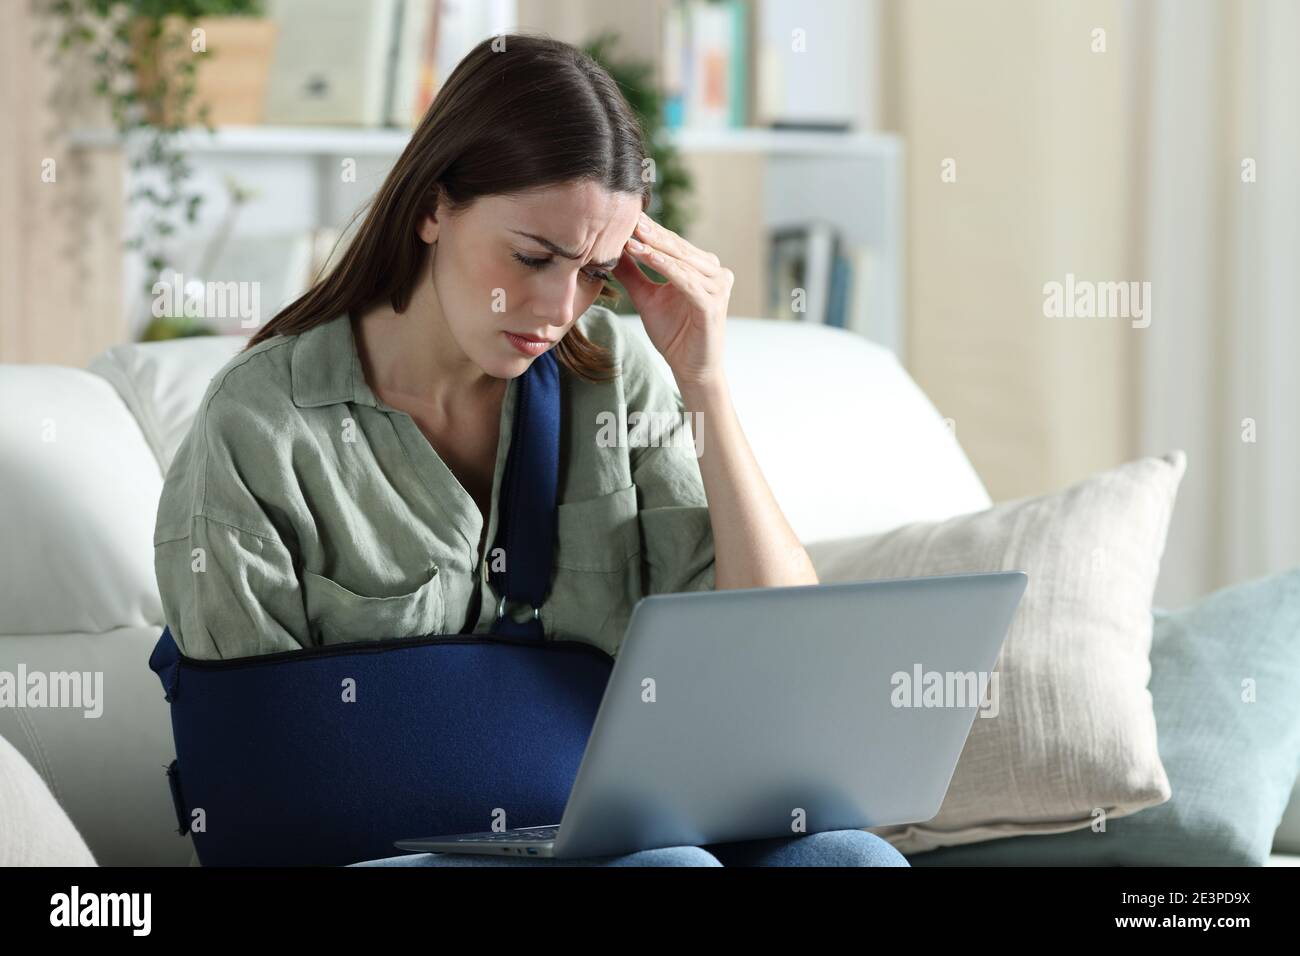 Worried handicapped woman reading bad news on laptop sitting on a couch in the living room at home Stock Photo